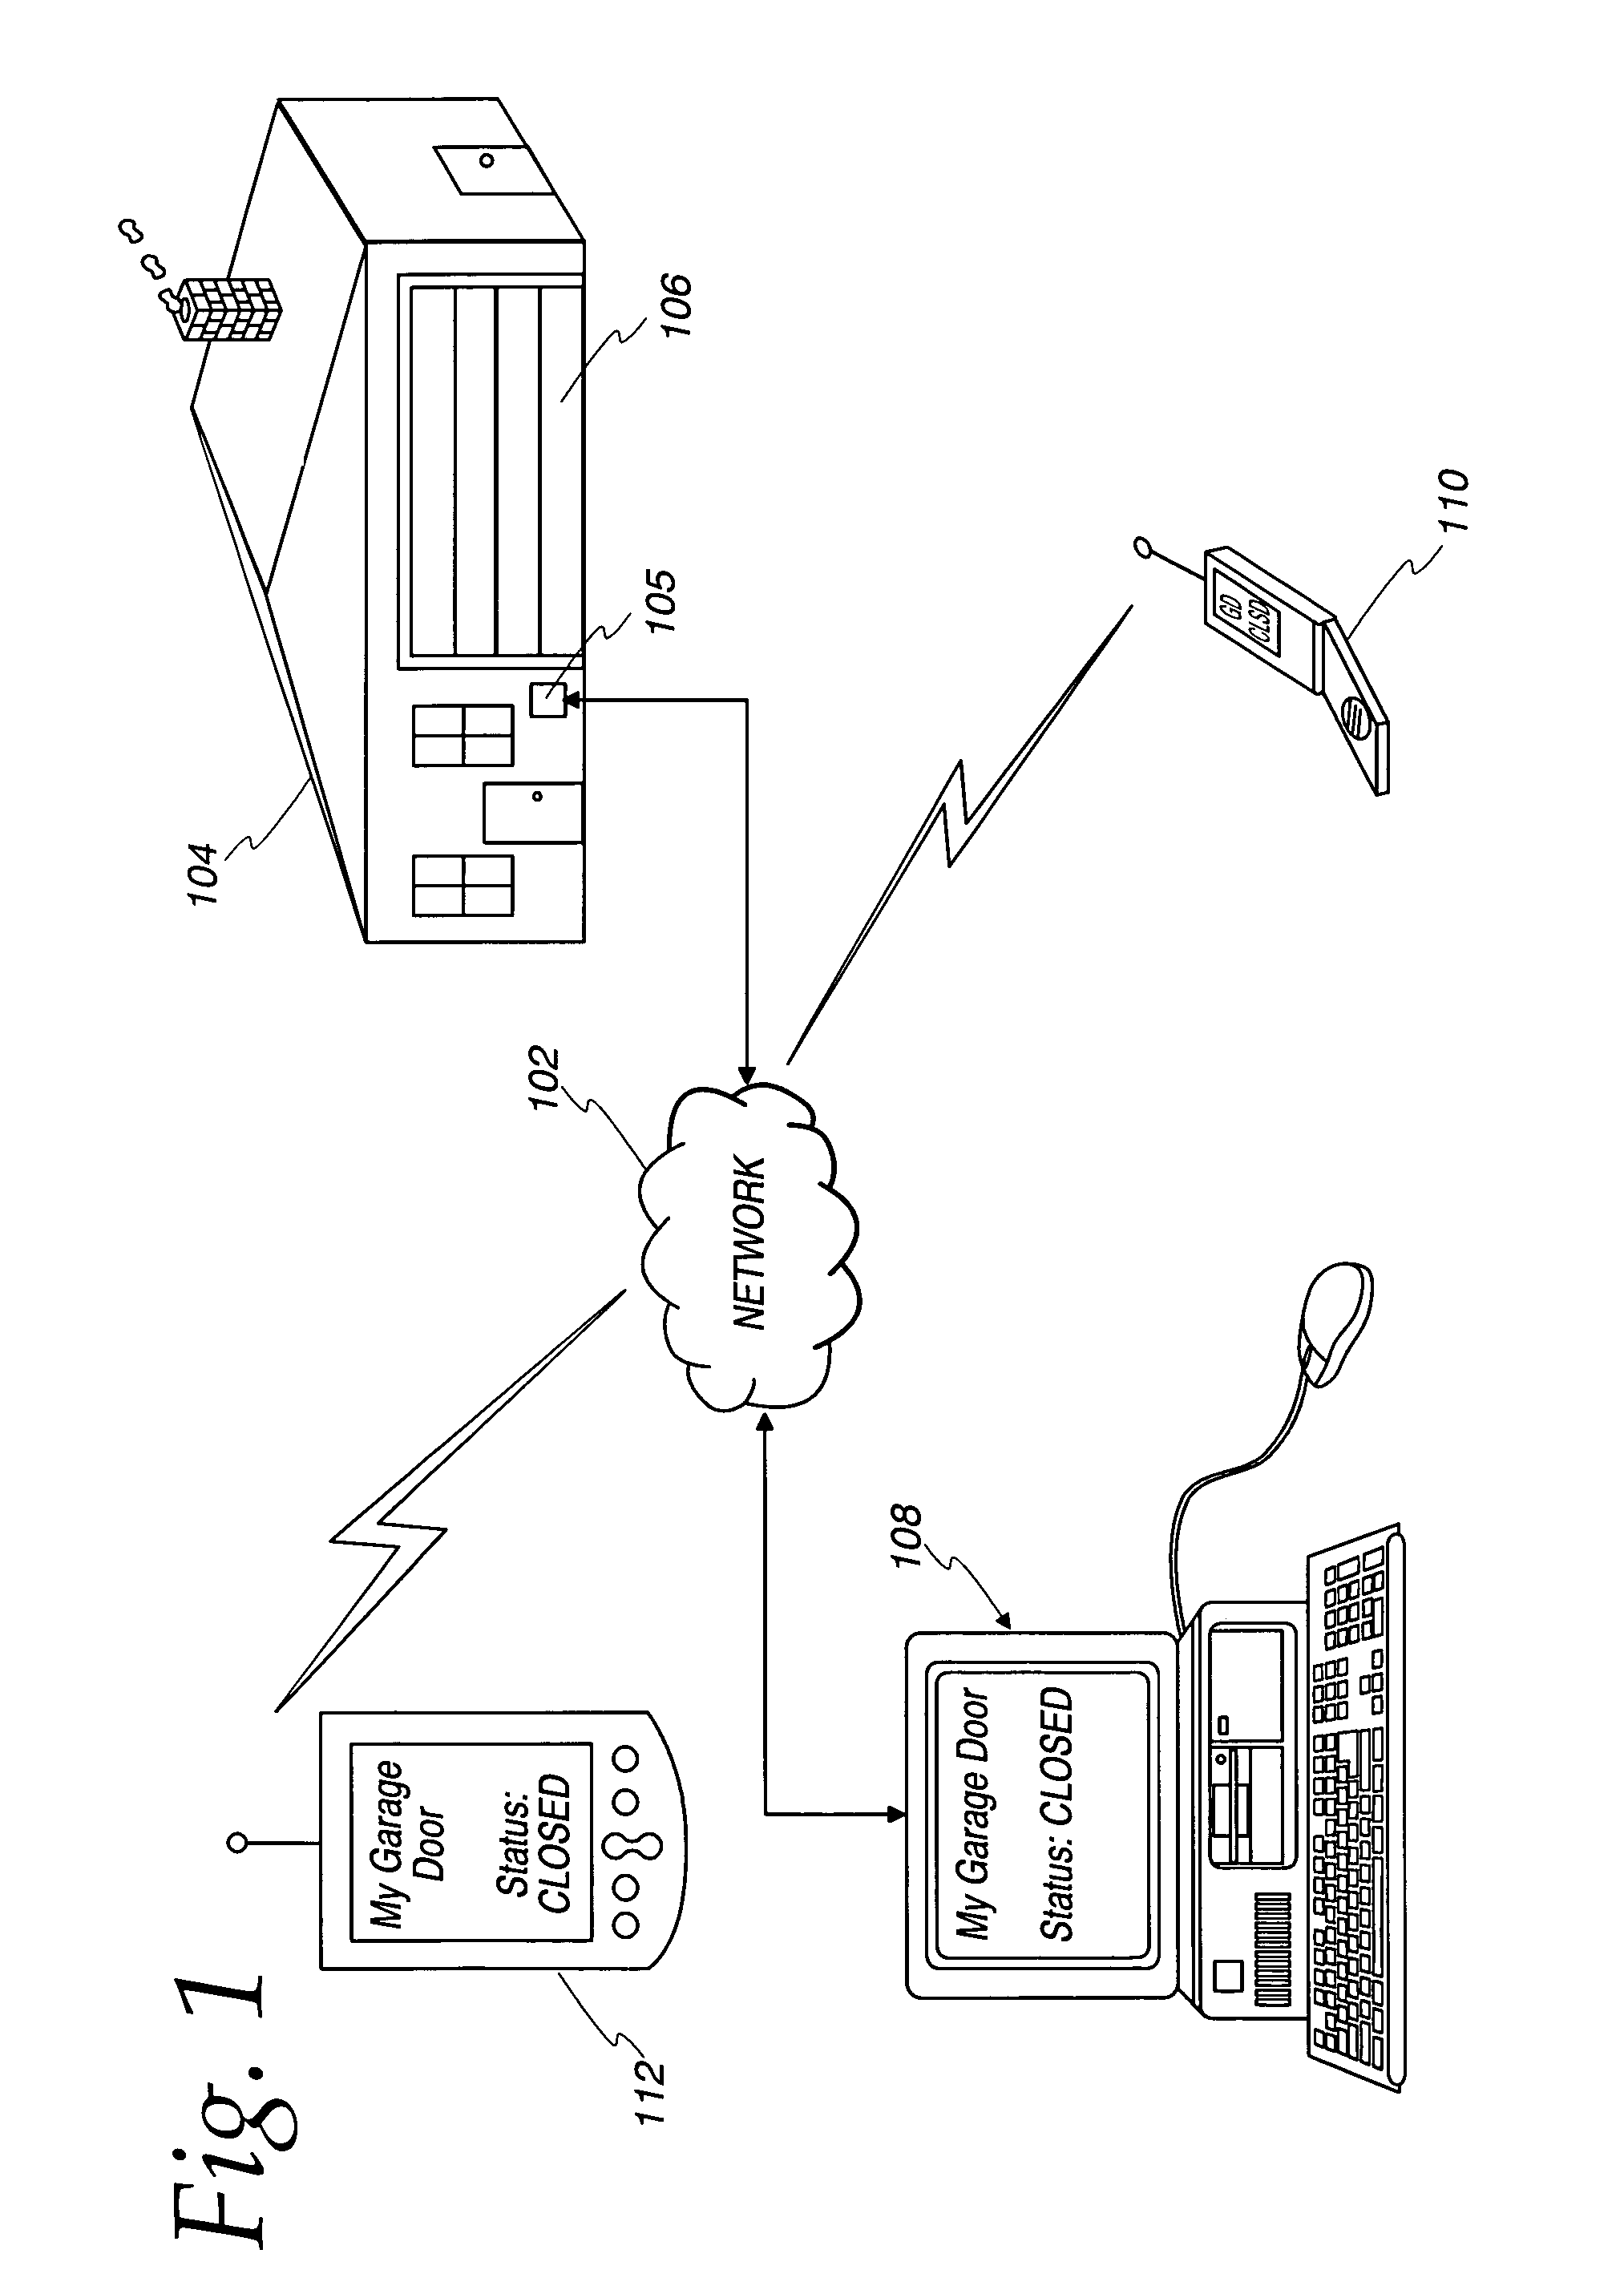 Method and apparatus for monitoring a movable barrier over a network